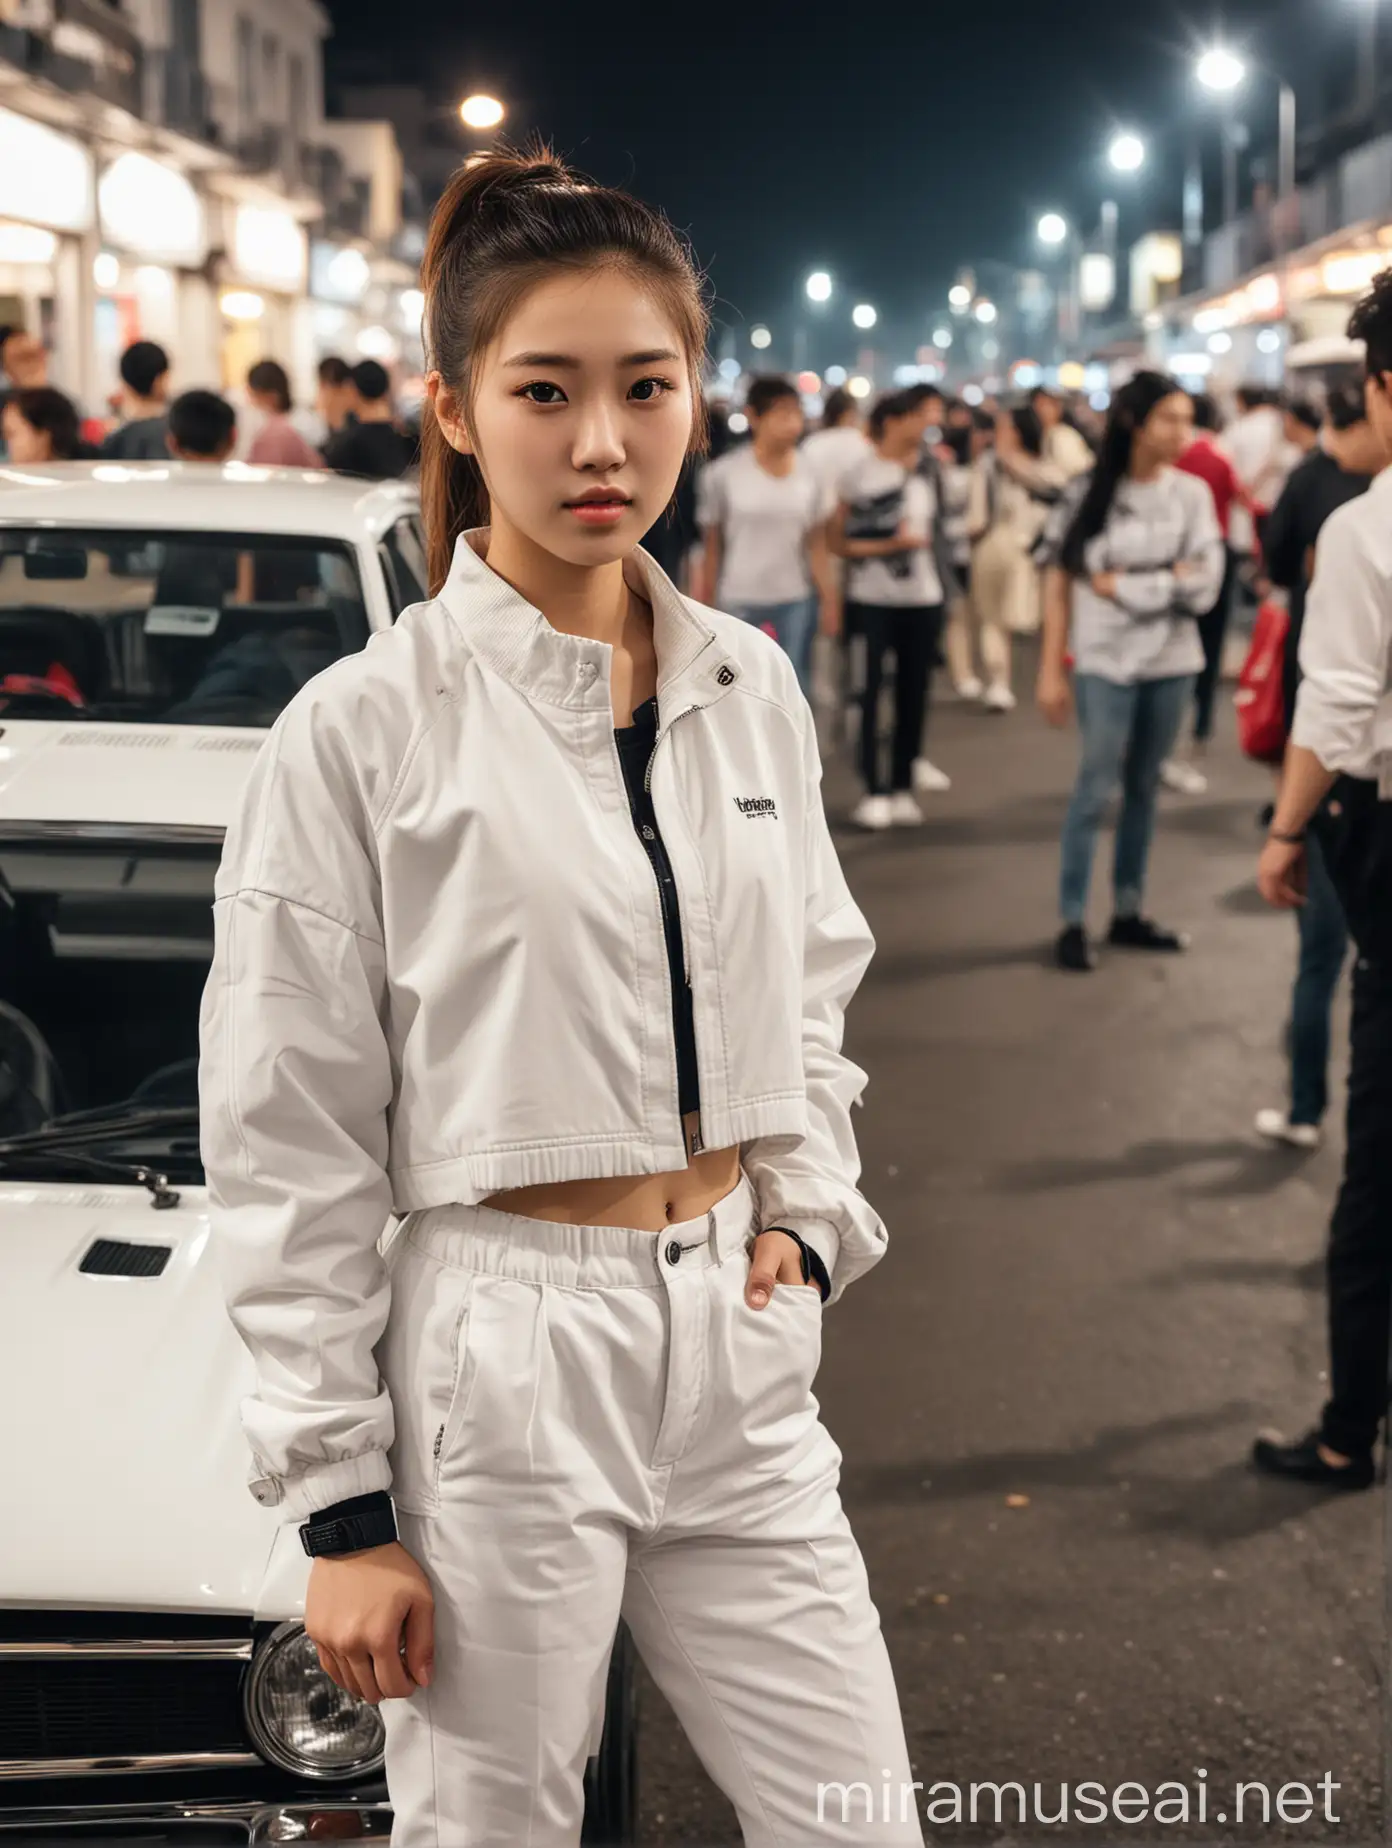 a beautiful Korean girl with her hair tied in a ponytail, wearing a white jacket, white trousers, black shoes, her hands tucked in, is standing next to a white Tamiya car with a handsome young man with layered mulet hair, wearing a white t-shirt, black trousers, black shoes, her hands in her trouser pockets, with a facial expression. proud. with the background of racing on the street with several other cars and there are people in the evening atmosphere with thin smoke on the road and around the car